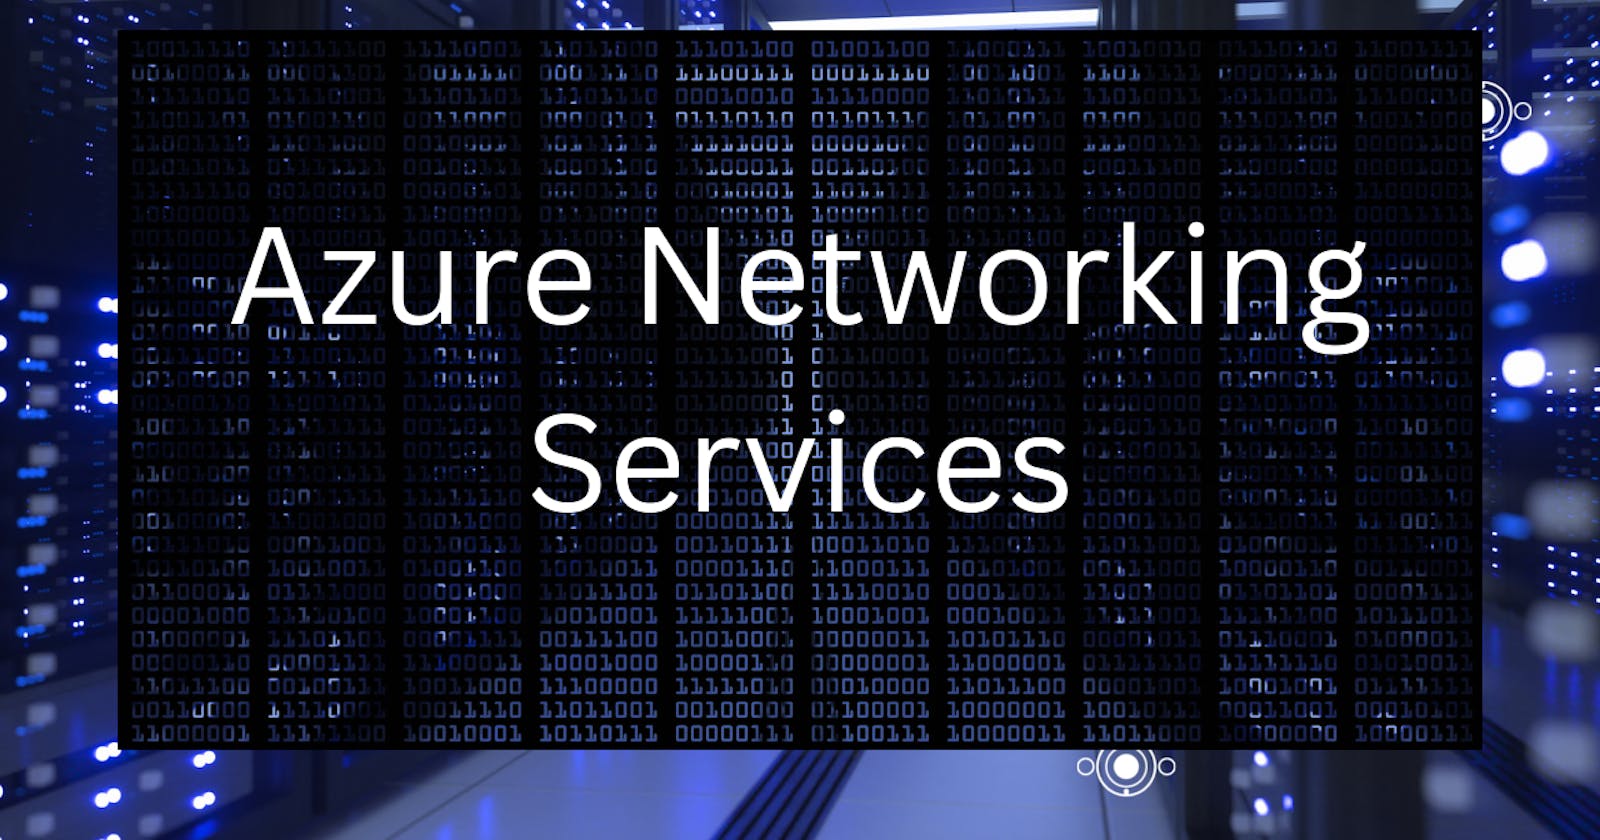 Day-31 Azure Networking Services